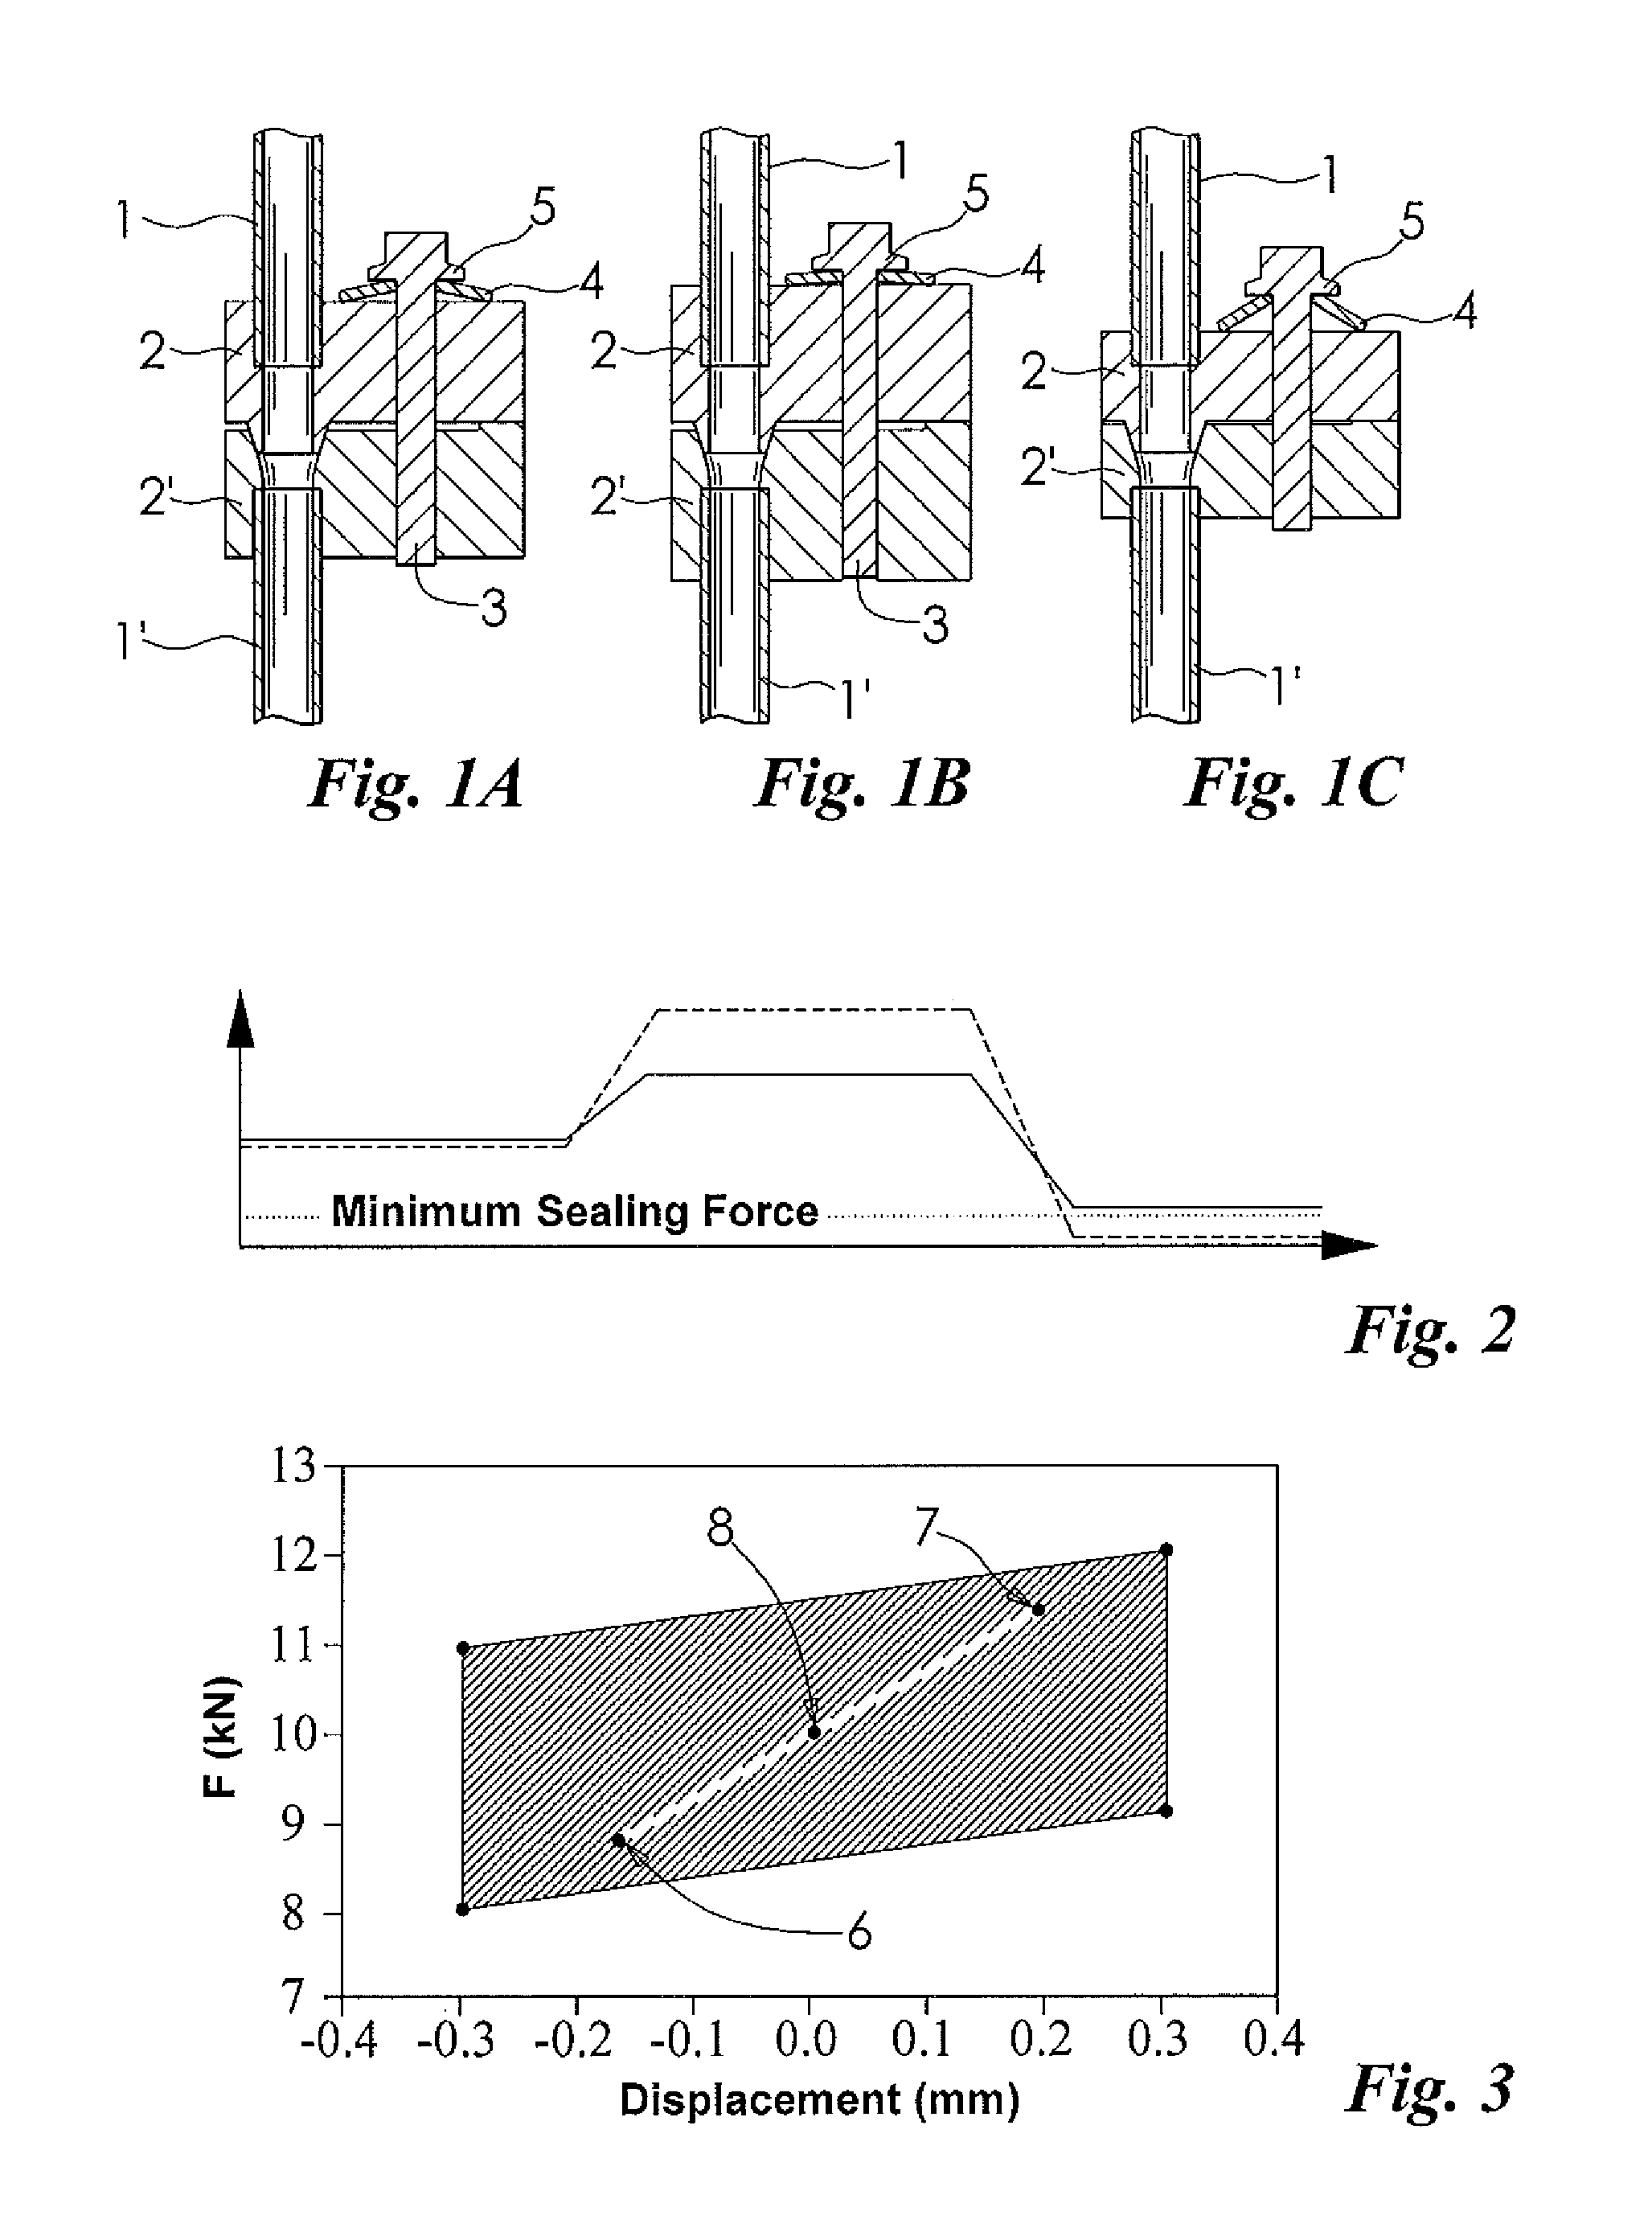 Axially sealing system for connecting fluid-passed conduits